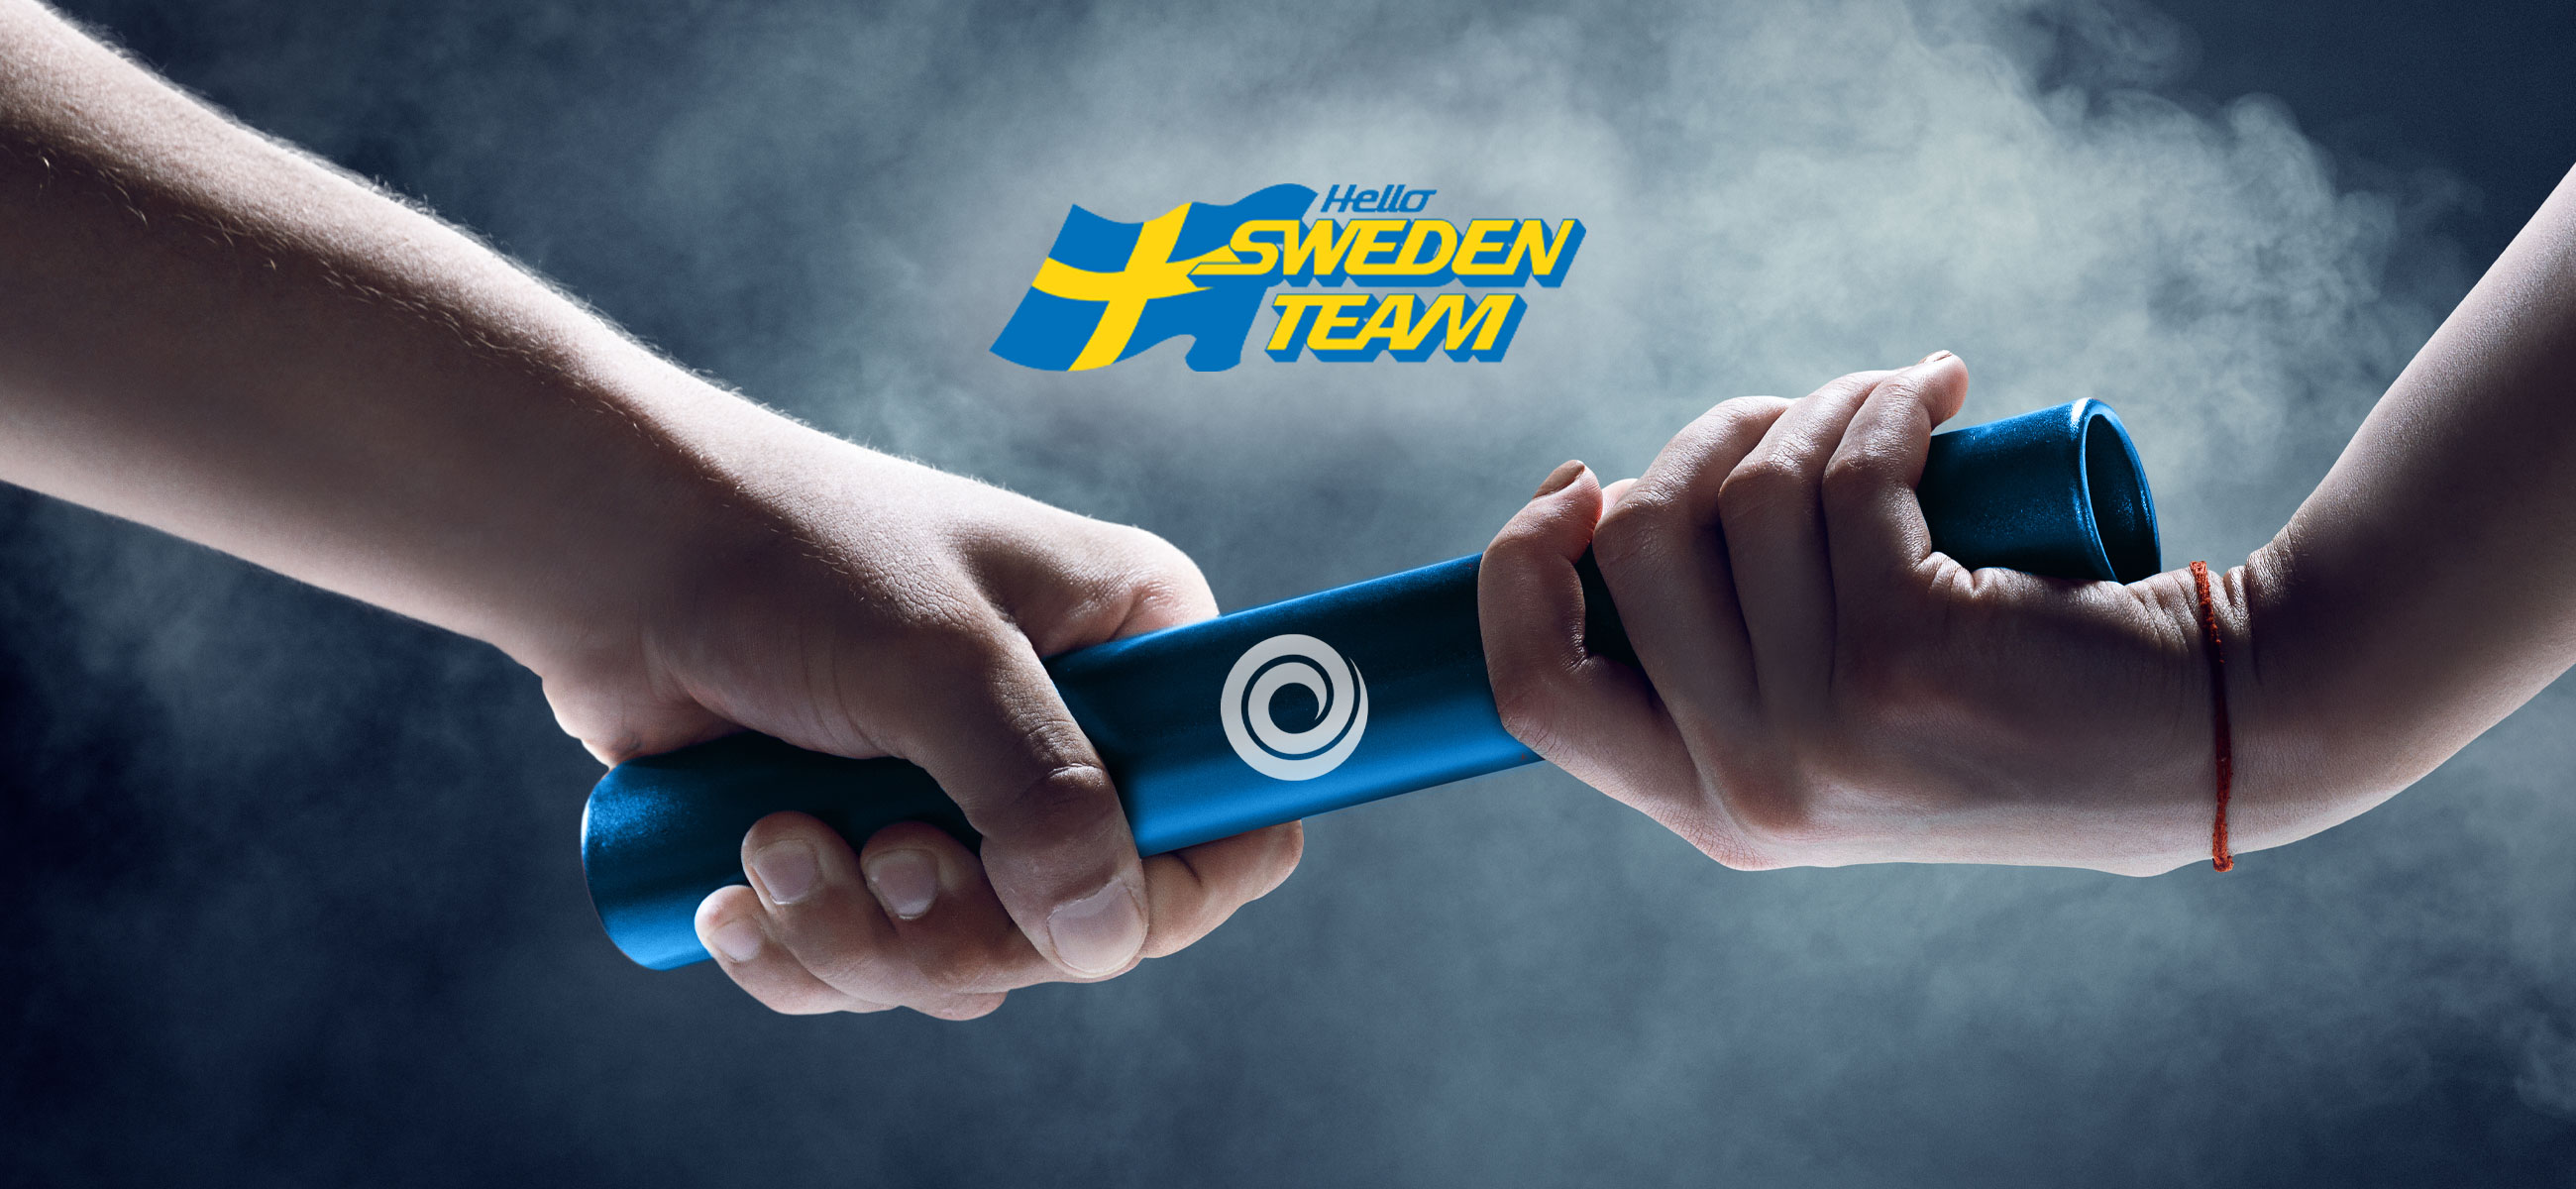 EWES in partnership with Hello Sweden